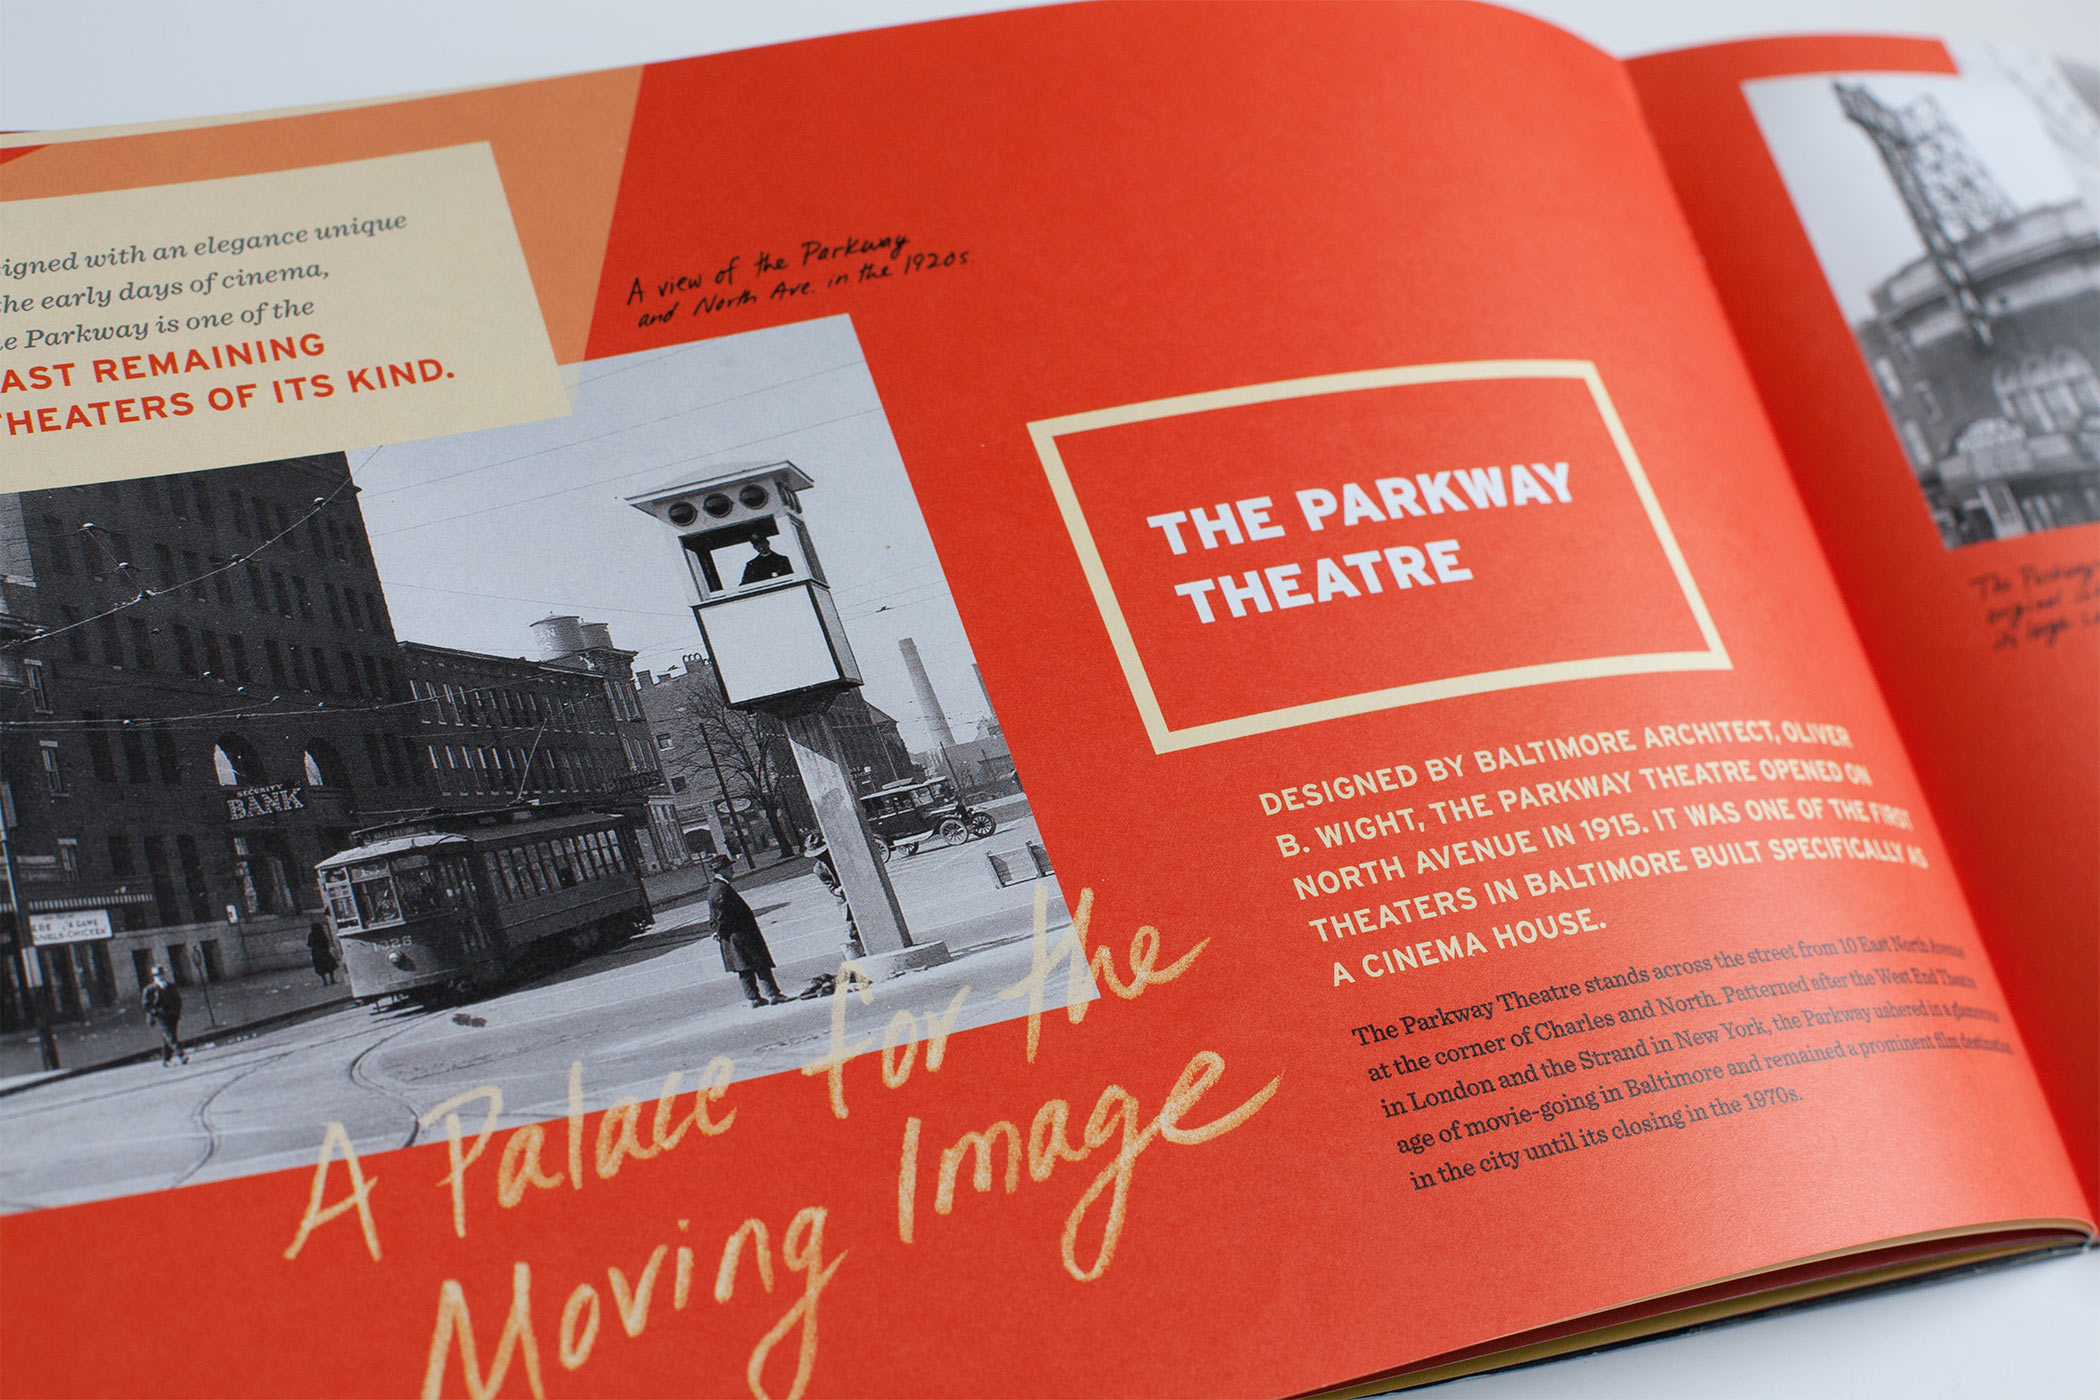 Detail of the Campaign for the Parkway Film Center case-statement, fundraising book